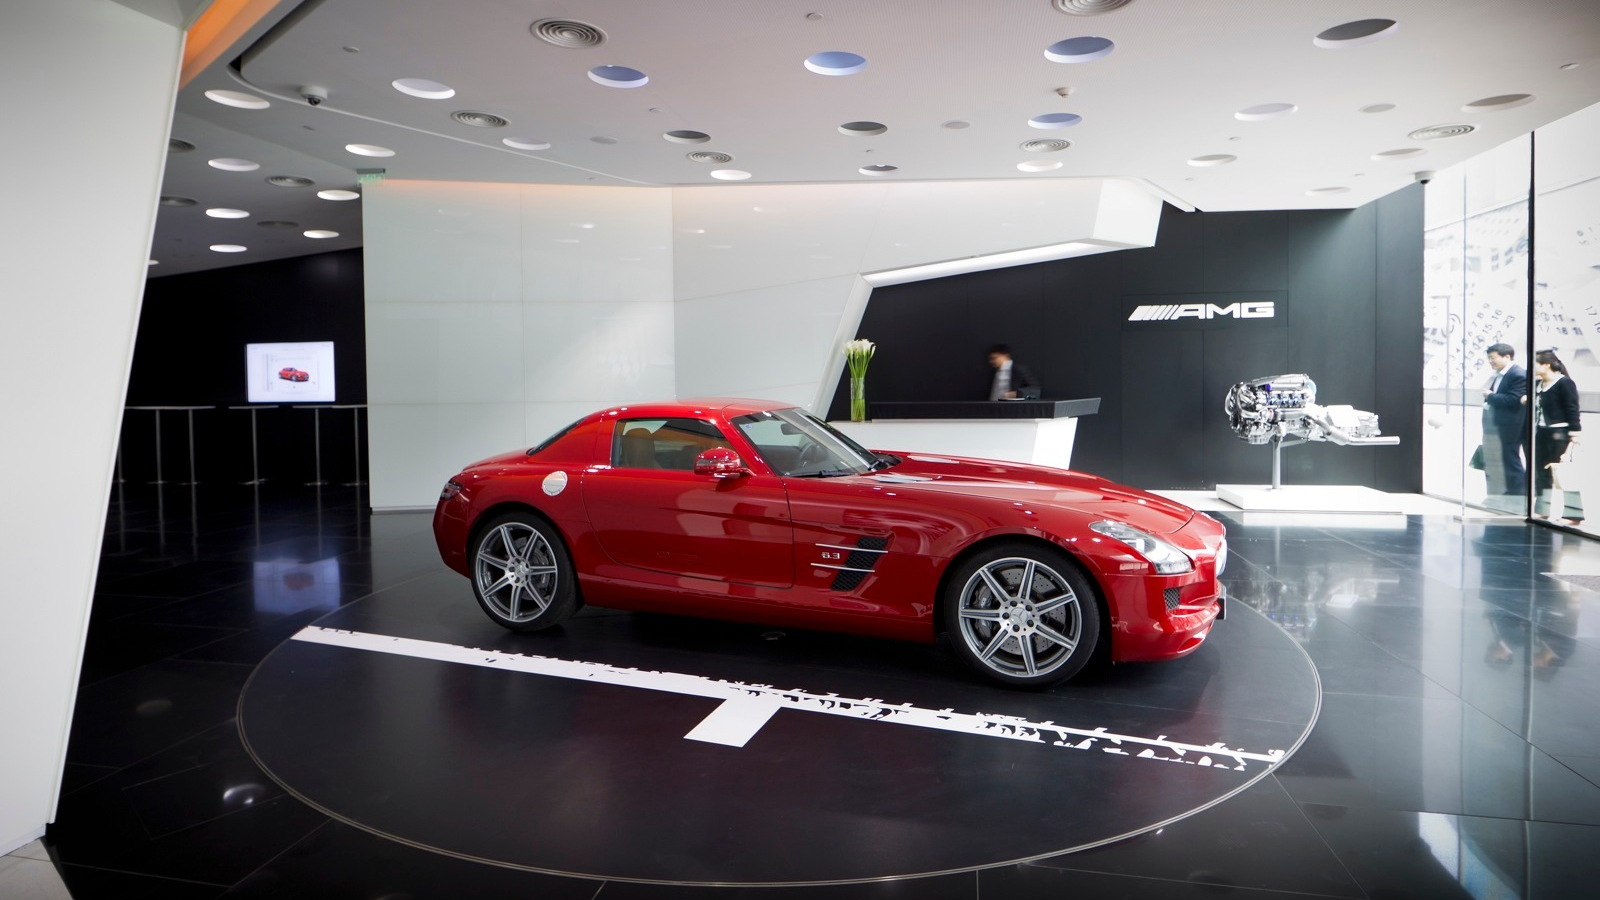 AMG's first stand alone dealership, the Beijing Sanlitun AMG Performance Center